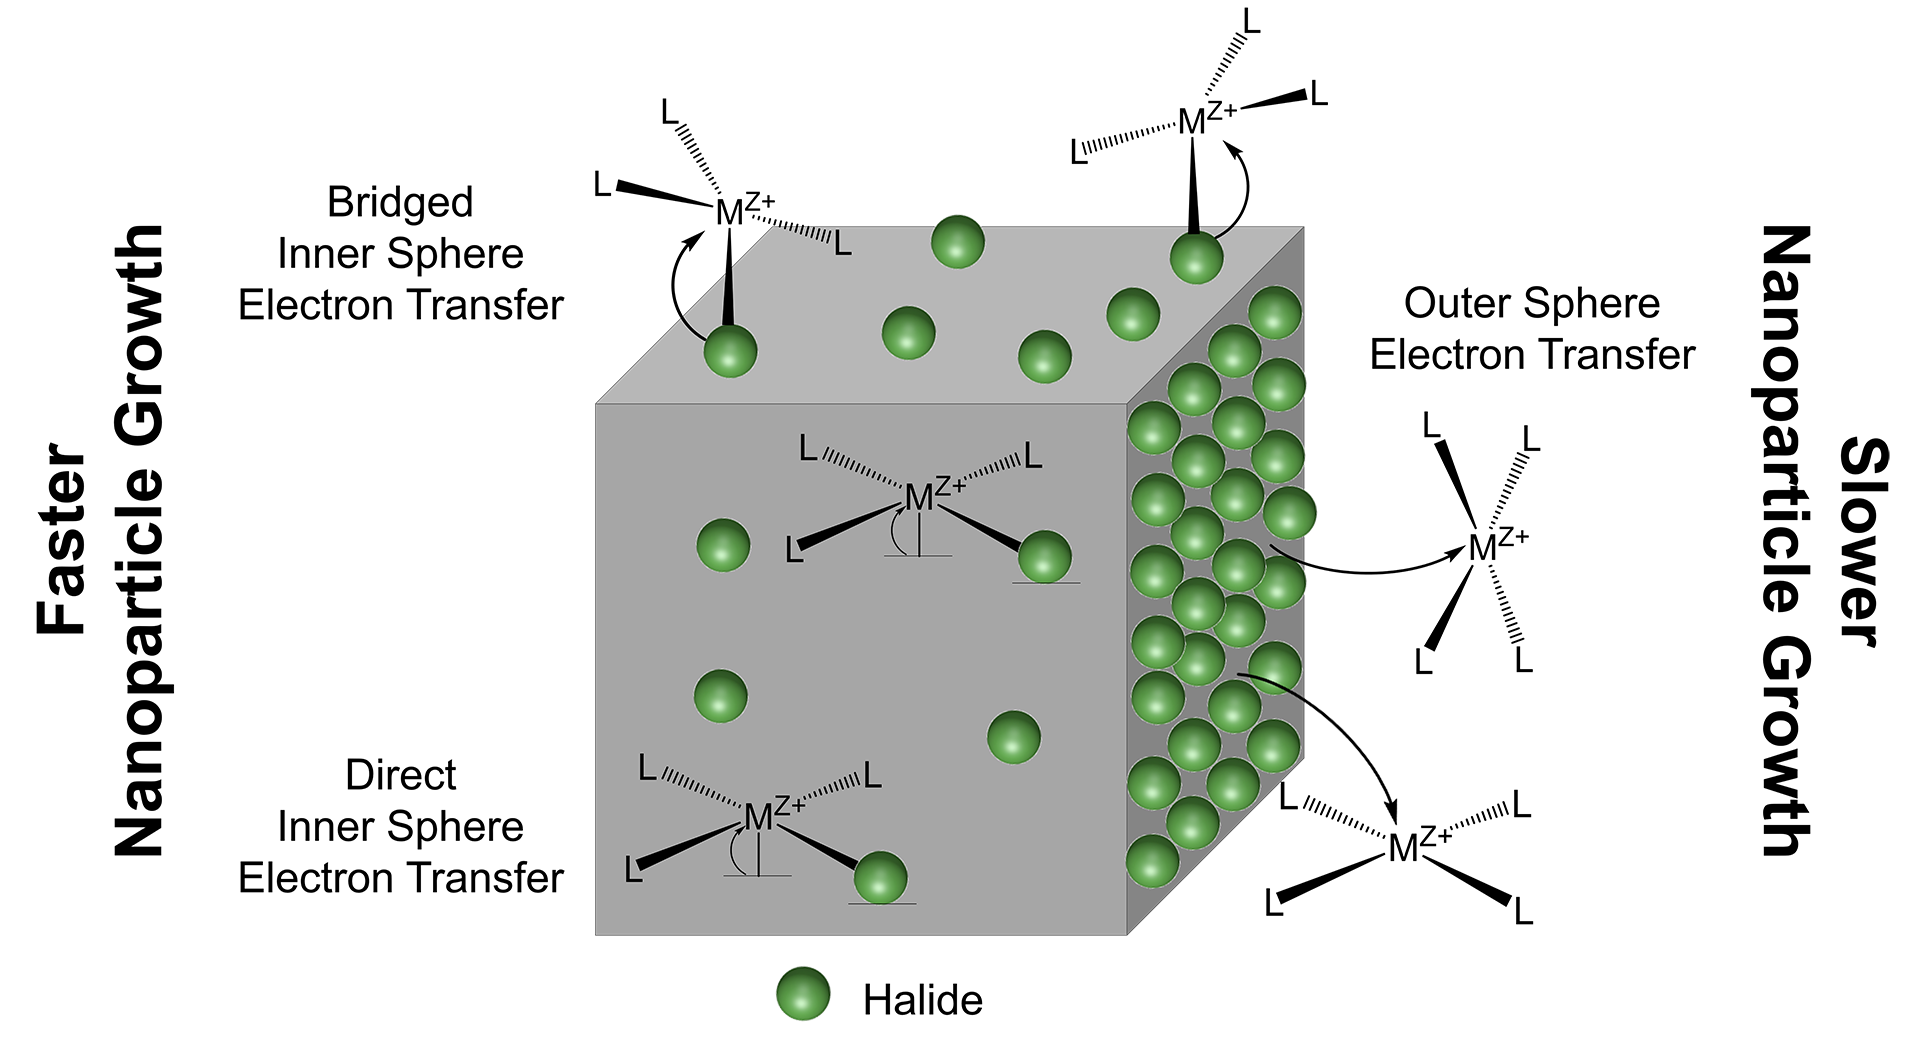 Table of contents graphic showing mechanisms of metal reduction on a cubic nanoparticle.